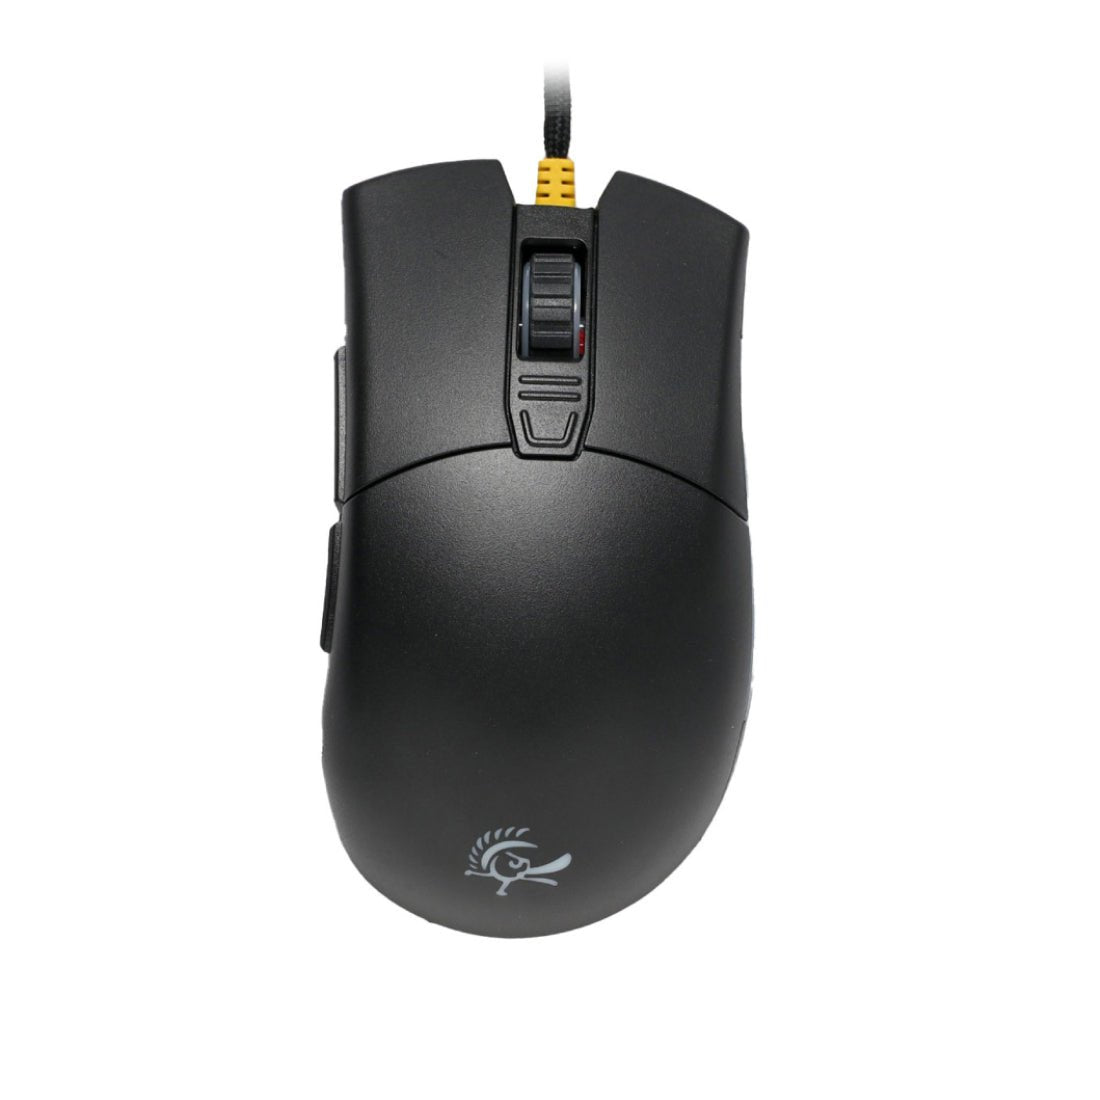 Ducky Secret M Retro Wired Gaming Mouse - Omron - فأرة - Store 974 | ستور ٩٧٤